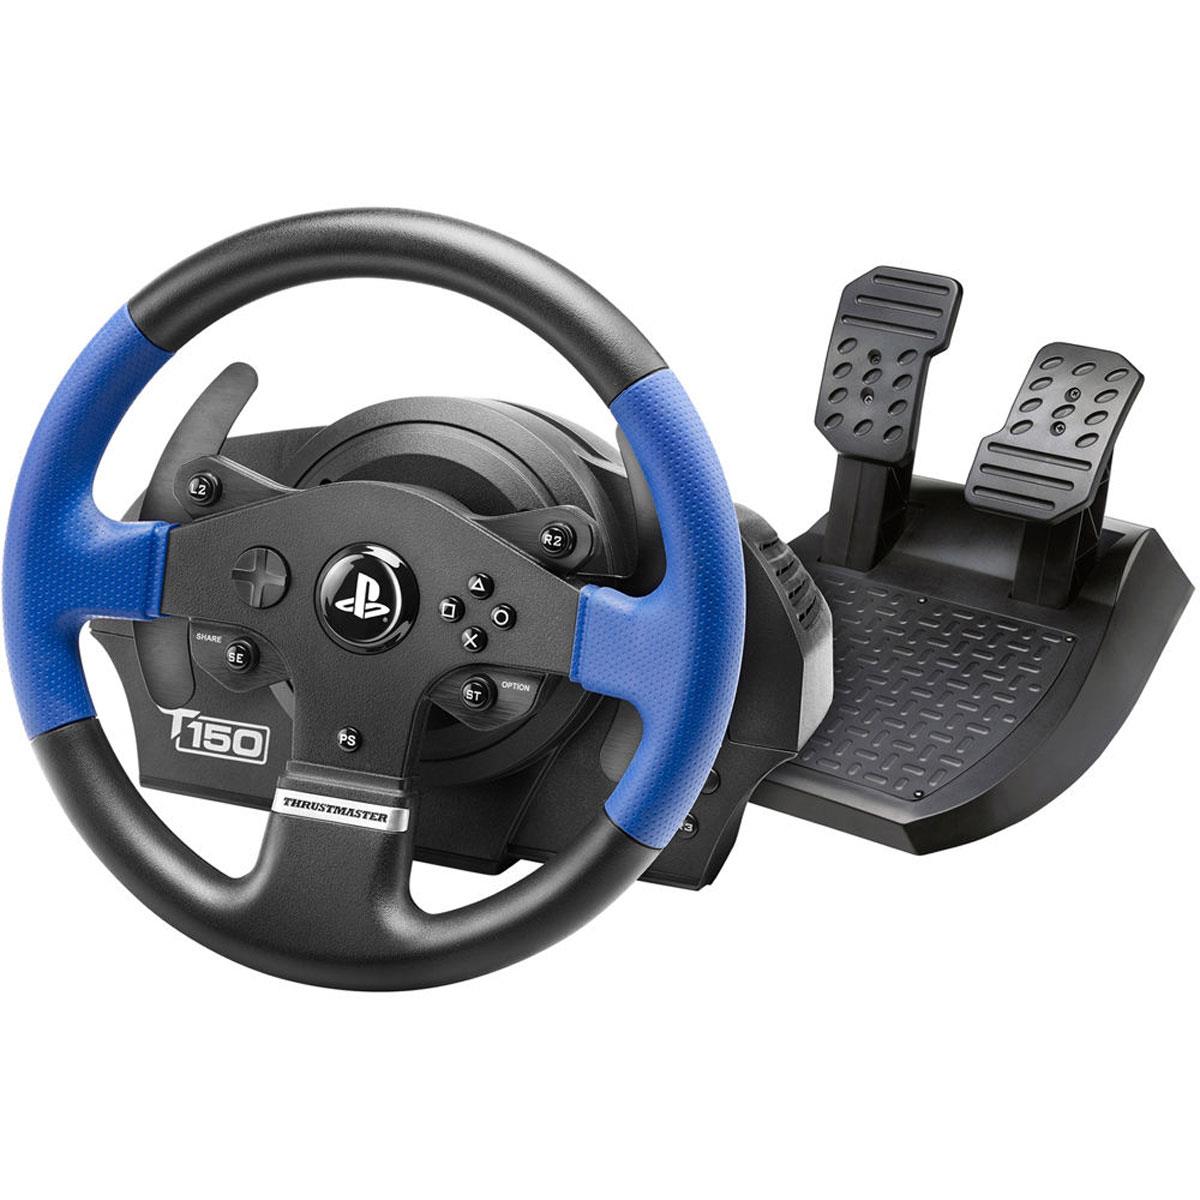 Image of Thrustmaster T150 Force Feedback Racing Wheel for PlayStation and PC